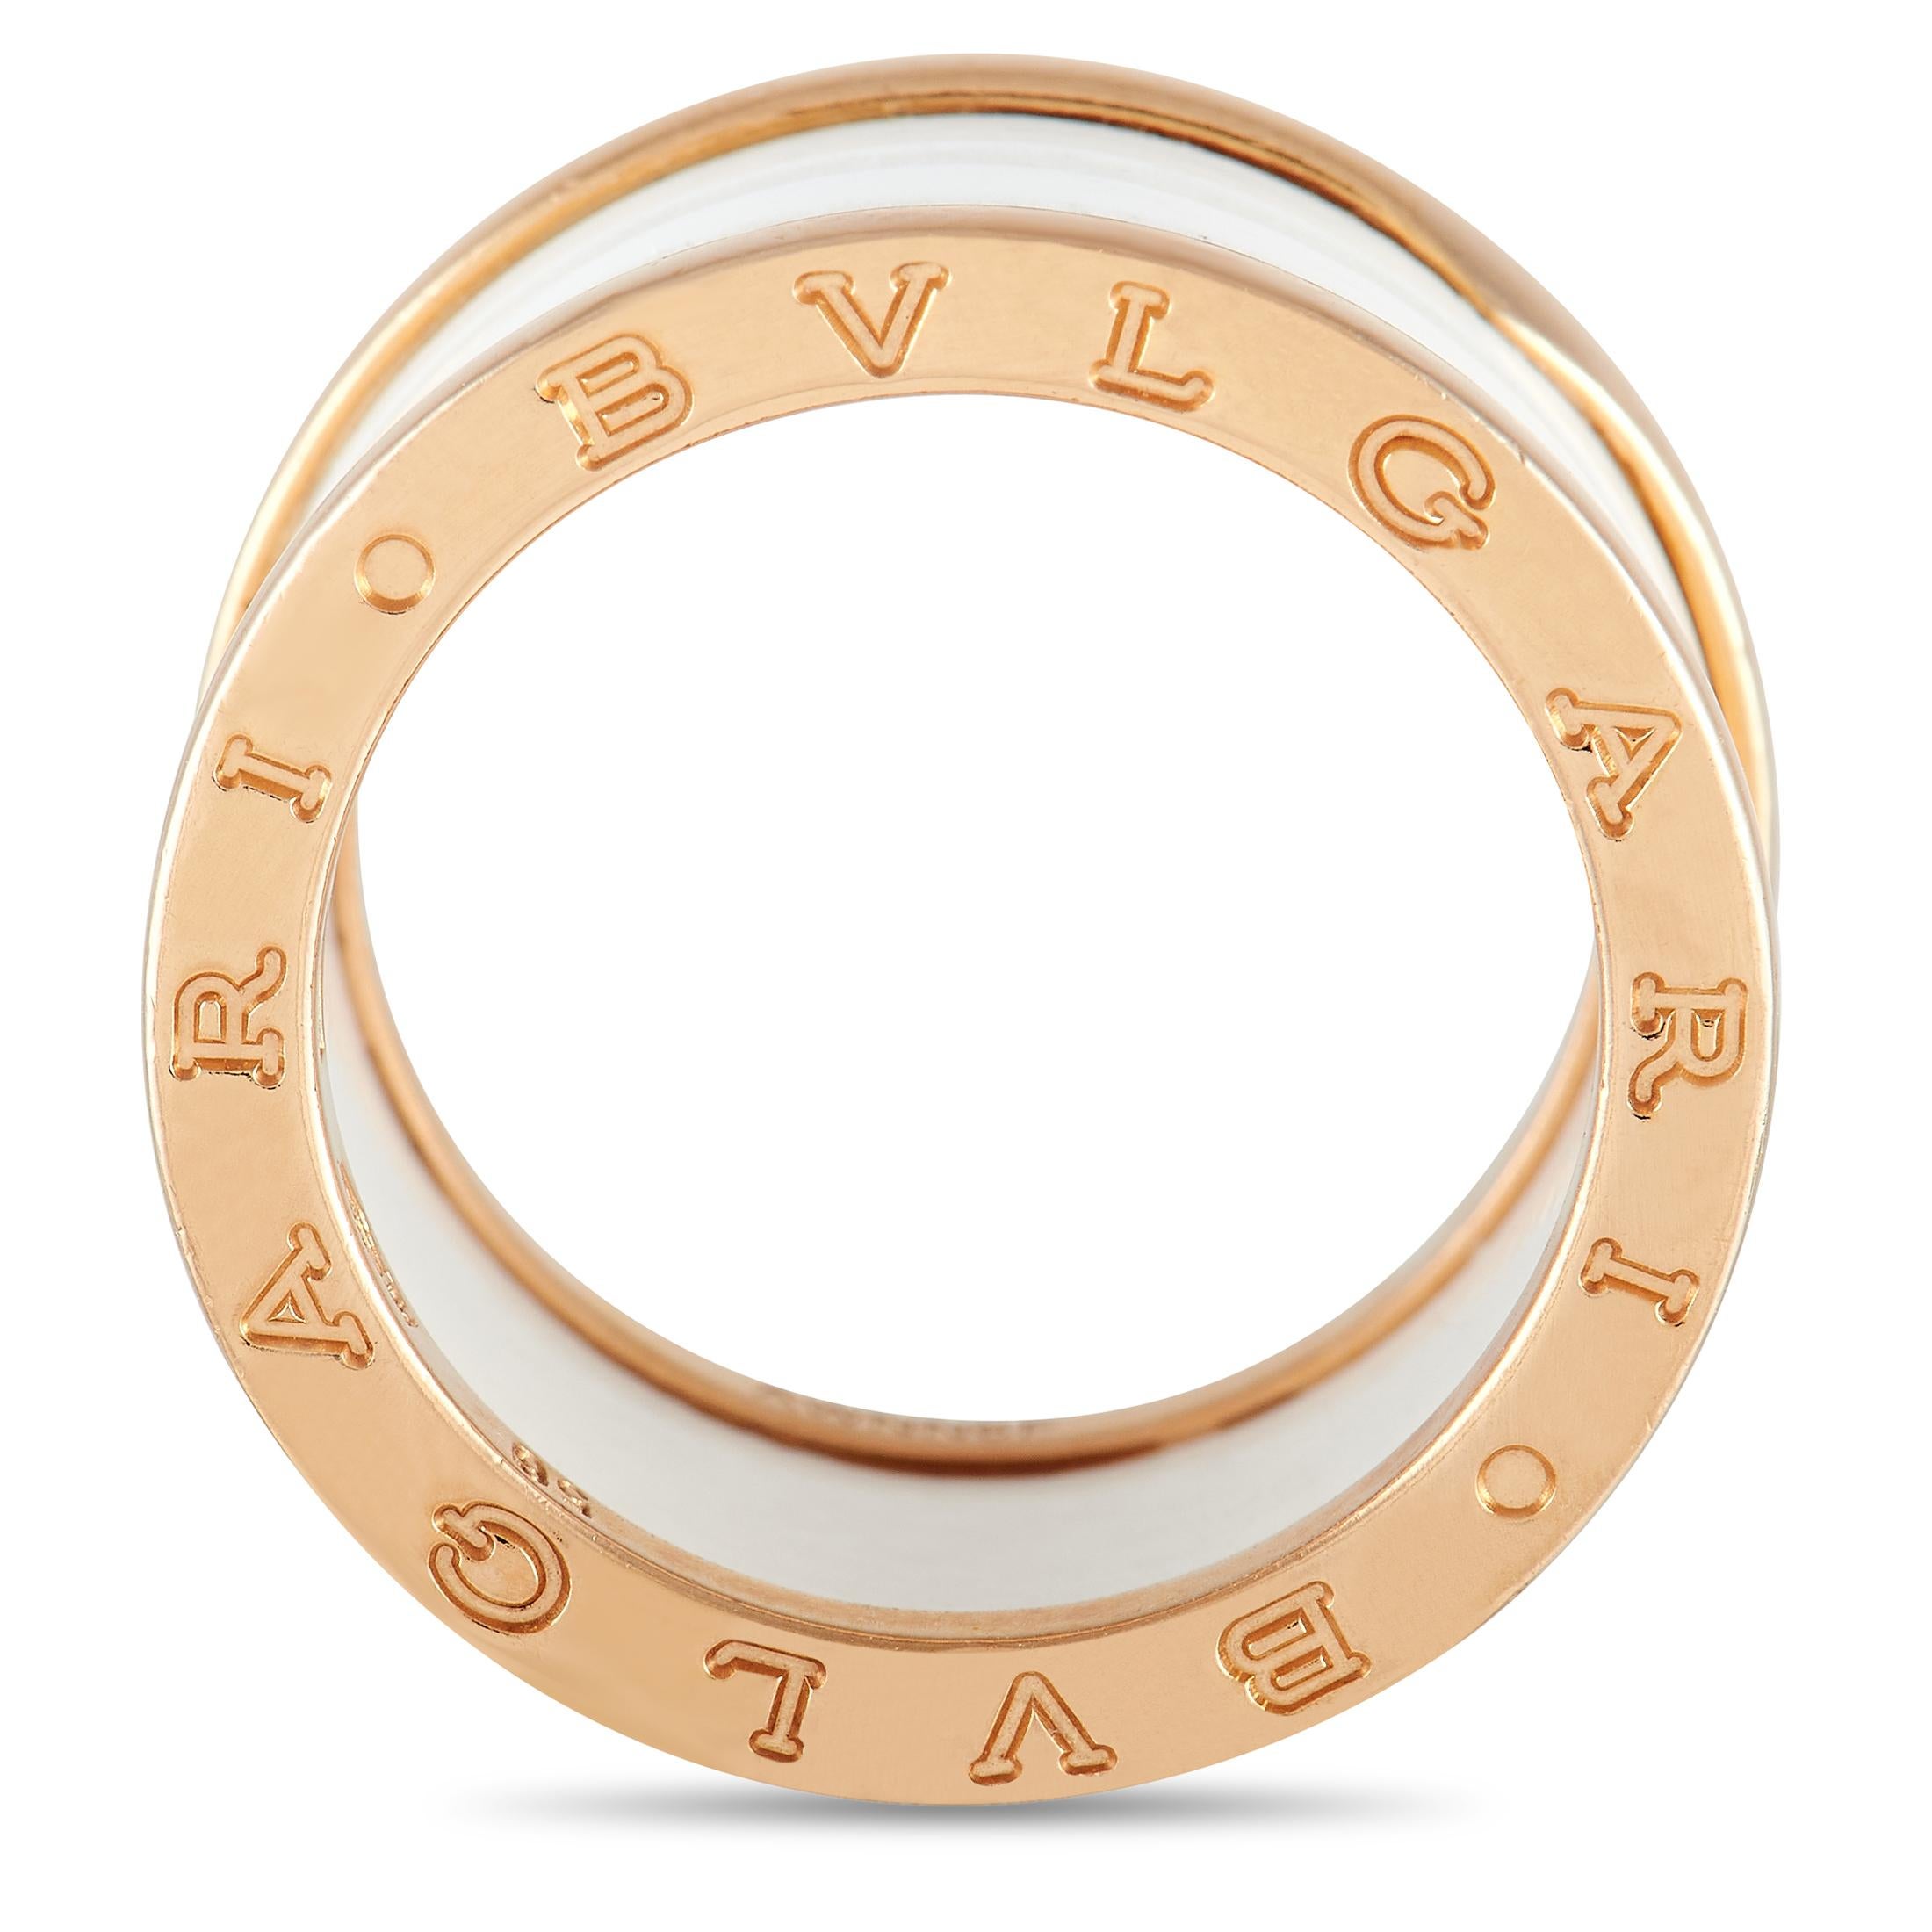 A stylish white ceramic spiral at the center symbolizes the harmony of past, present, and future on this exquisite Bvlgari B.Zero1 ring. Crafted from 18K Rose Gold, this effortless accessory features the luxury brand’s iconic signature engraved at